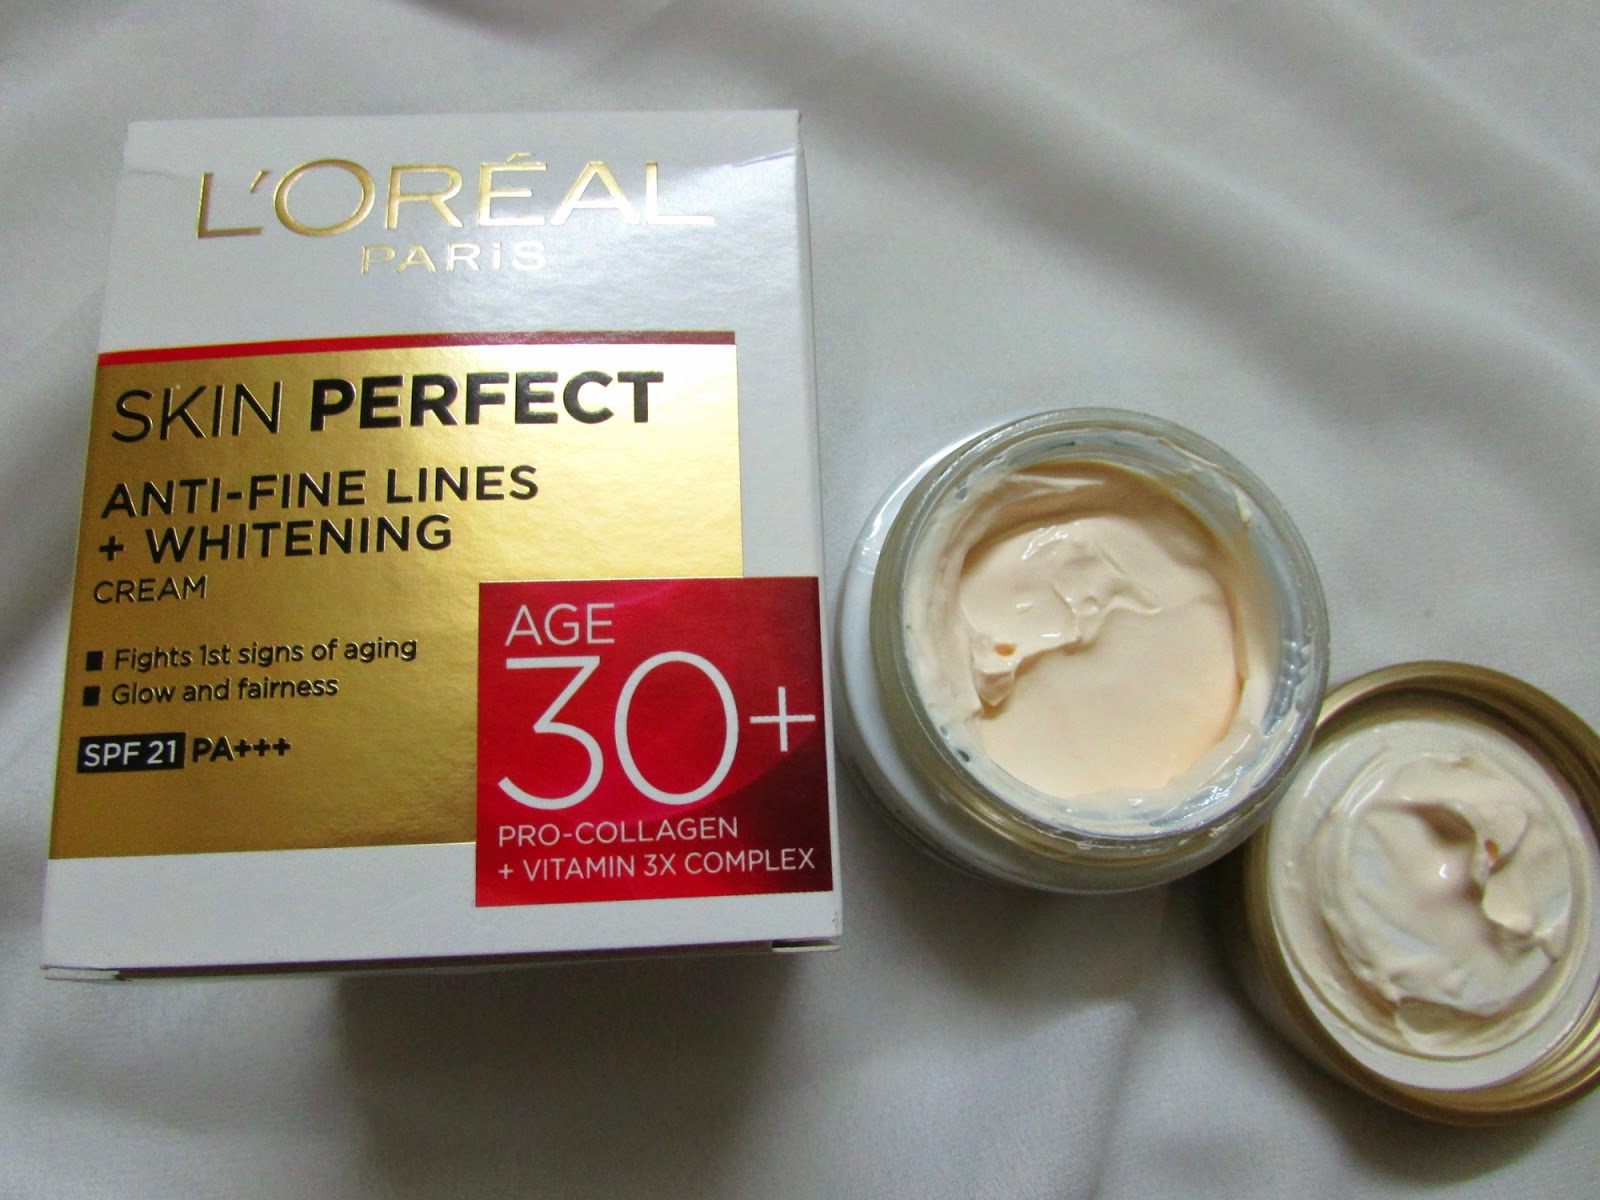 Loreal Skin Perfect Creams,Loreal Paris Skin Perfect Anti Imperfections + Whitening Cream Age 20+, Loreal Paris Skin Perfect Anti Fine Lines + Whitening Cream Age 30+, Loreal Paris Skin Perfect Anti Aging + Whitening Cream Age 40+, Loreal Skin Perfect Cream price review, anti aging cream, cream, anti aging treatment, best anti aging cream, sunscreen cream, beauty , fashion,beauty and fashion,beauty blog, fashion blog , indian beauty blog,indian fashion blog, beauty and fashion blog, indian beauty and fashion blog, indian bloggers, indian beauty bloggers, indian fashion bloggers,indian bloggers online, top 10 indian bloggers, top indian bloggers,top 10 fashion bloggers, indian bloggers on blogspot,home remedies, how to